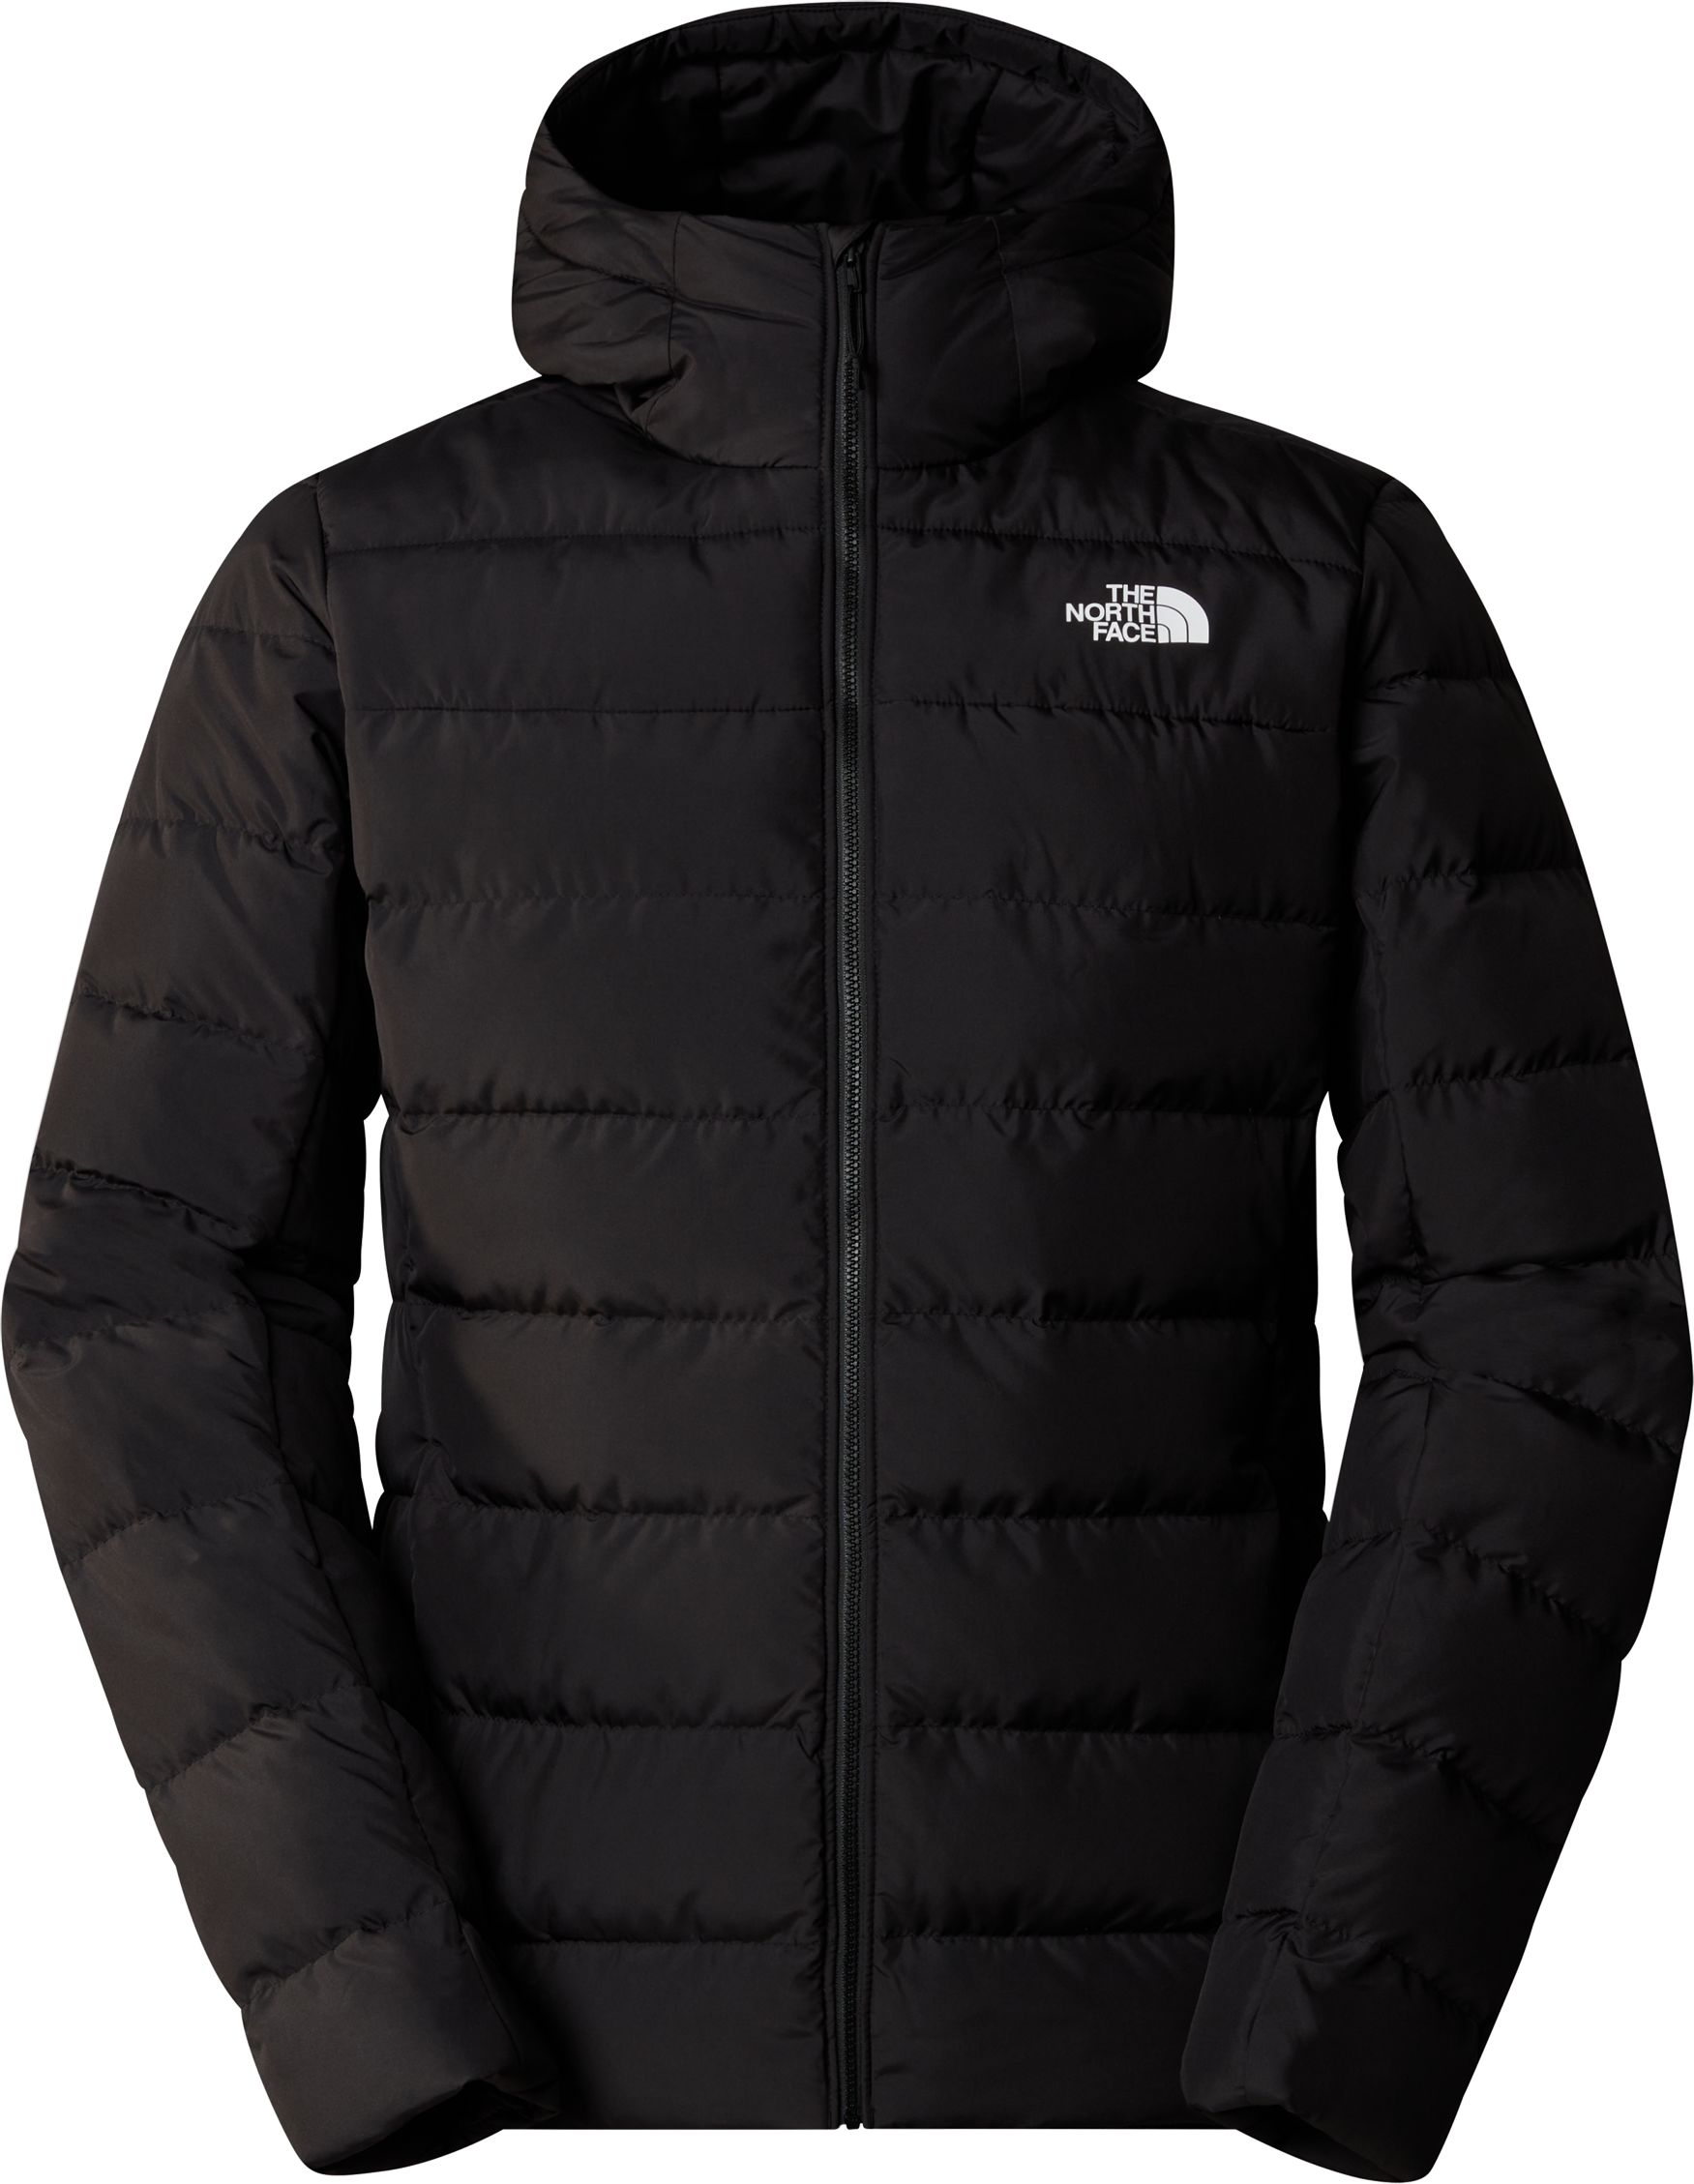 THE NORTH FACE, M ACONCAGUA 3 HOODIE